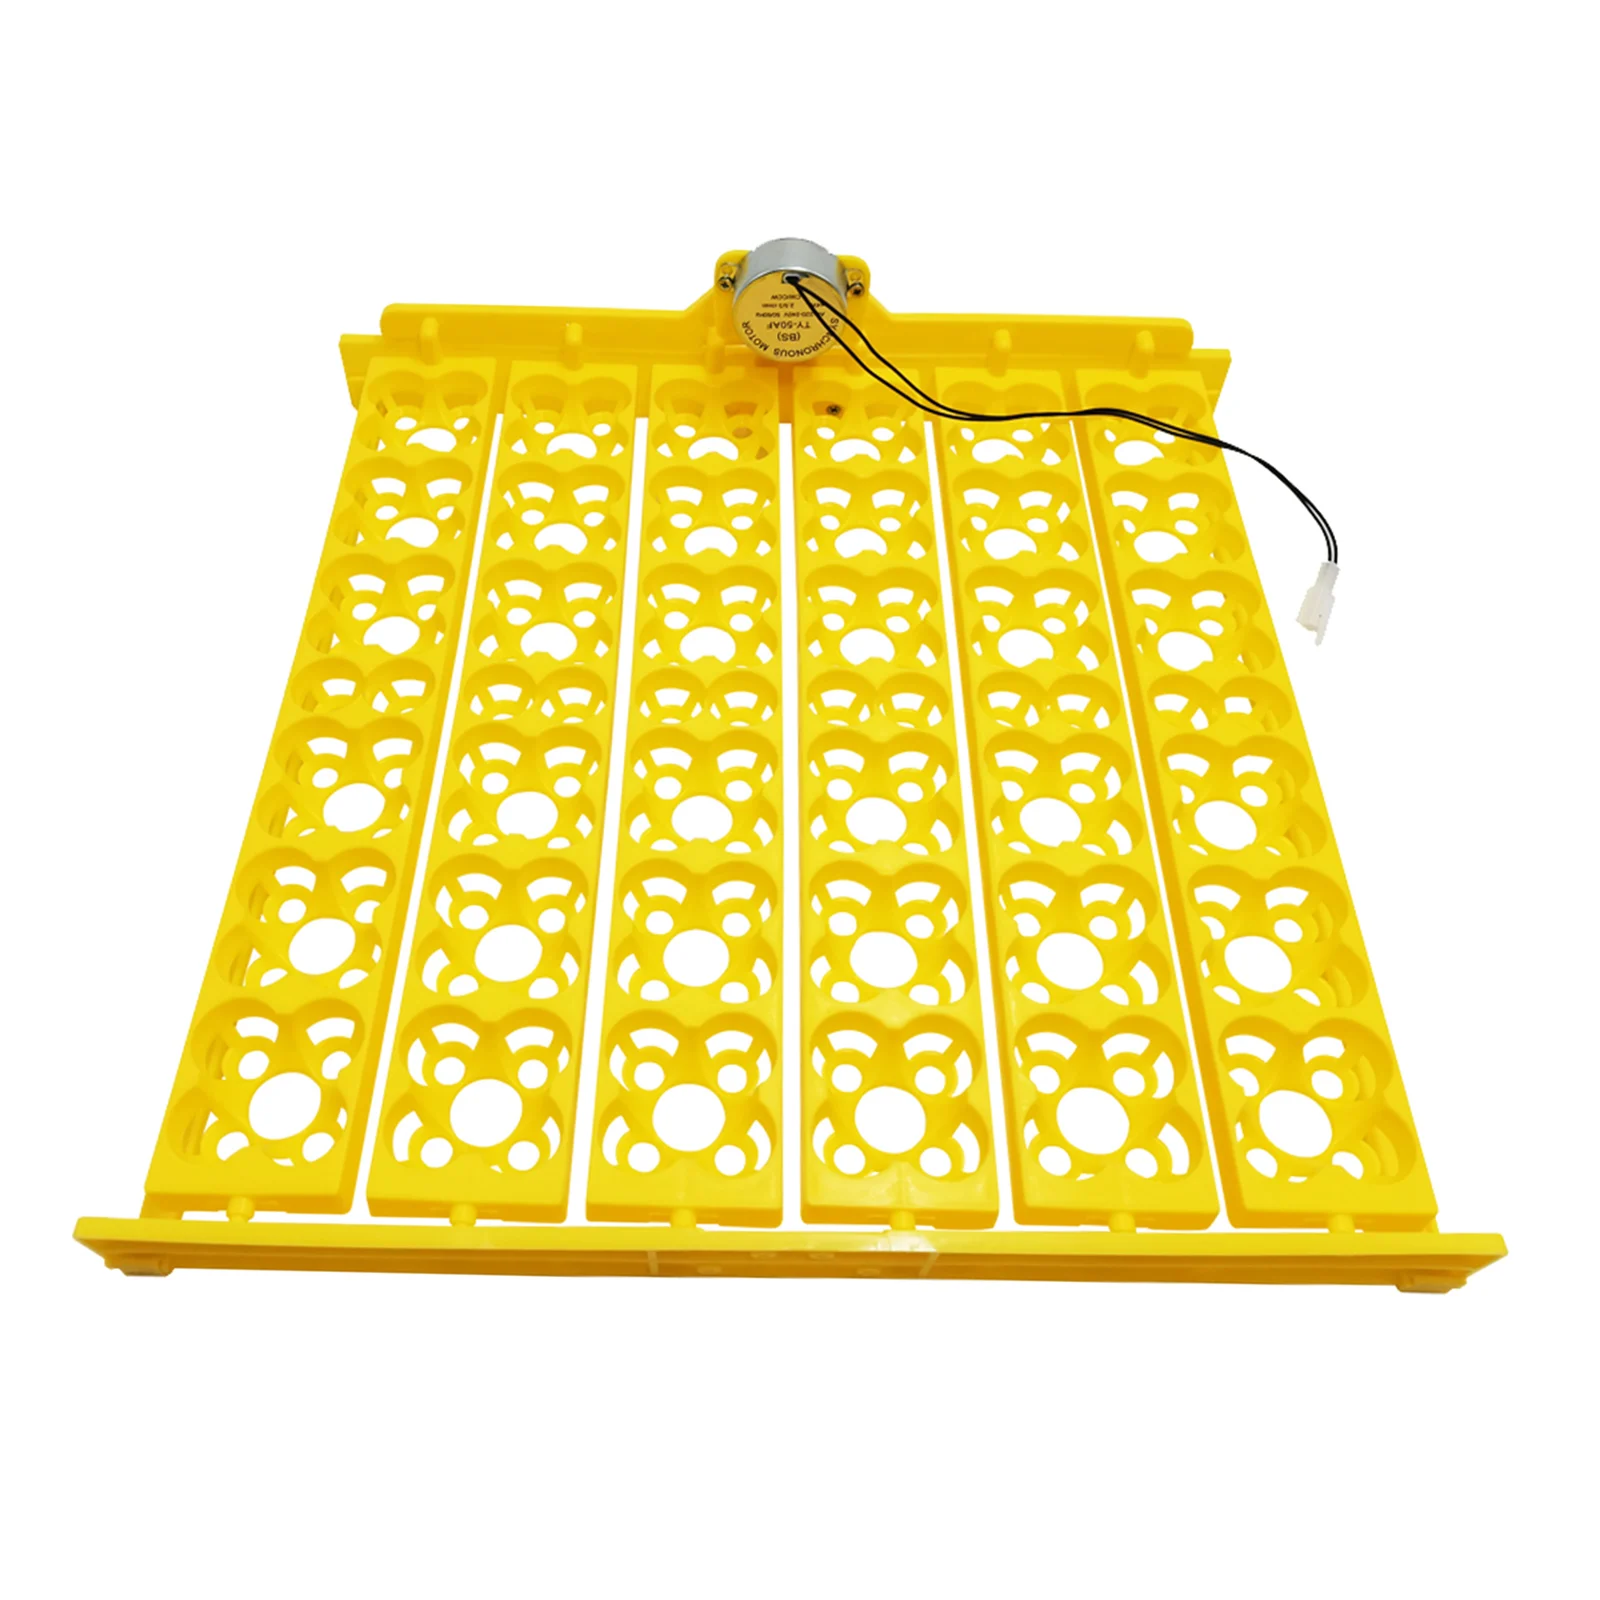 Eggs Incubator Automatic Turning Tray with Motor Farm Poultry Hatching Device for 36 Chicken Eggs, or 156 Quail Eggs, EU Type